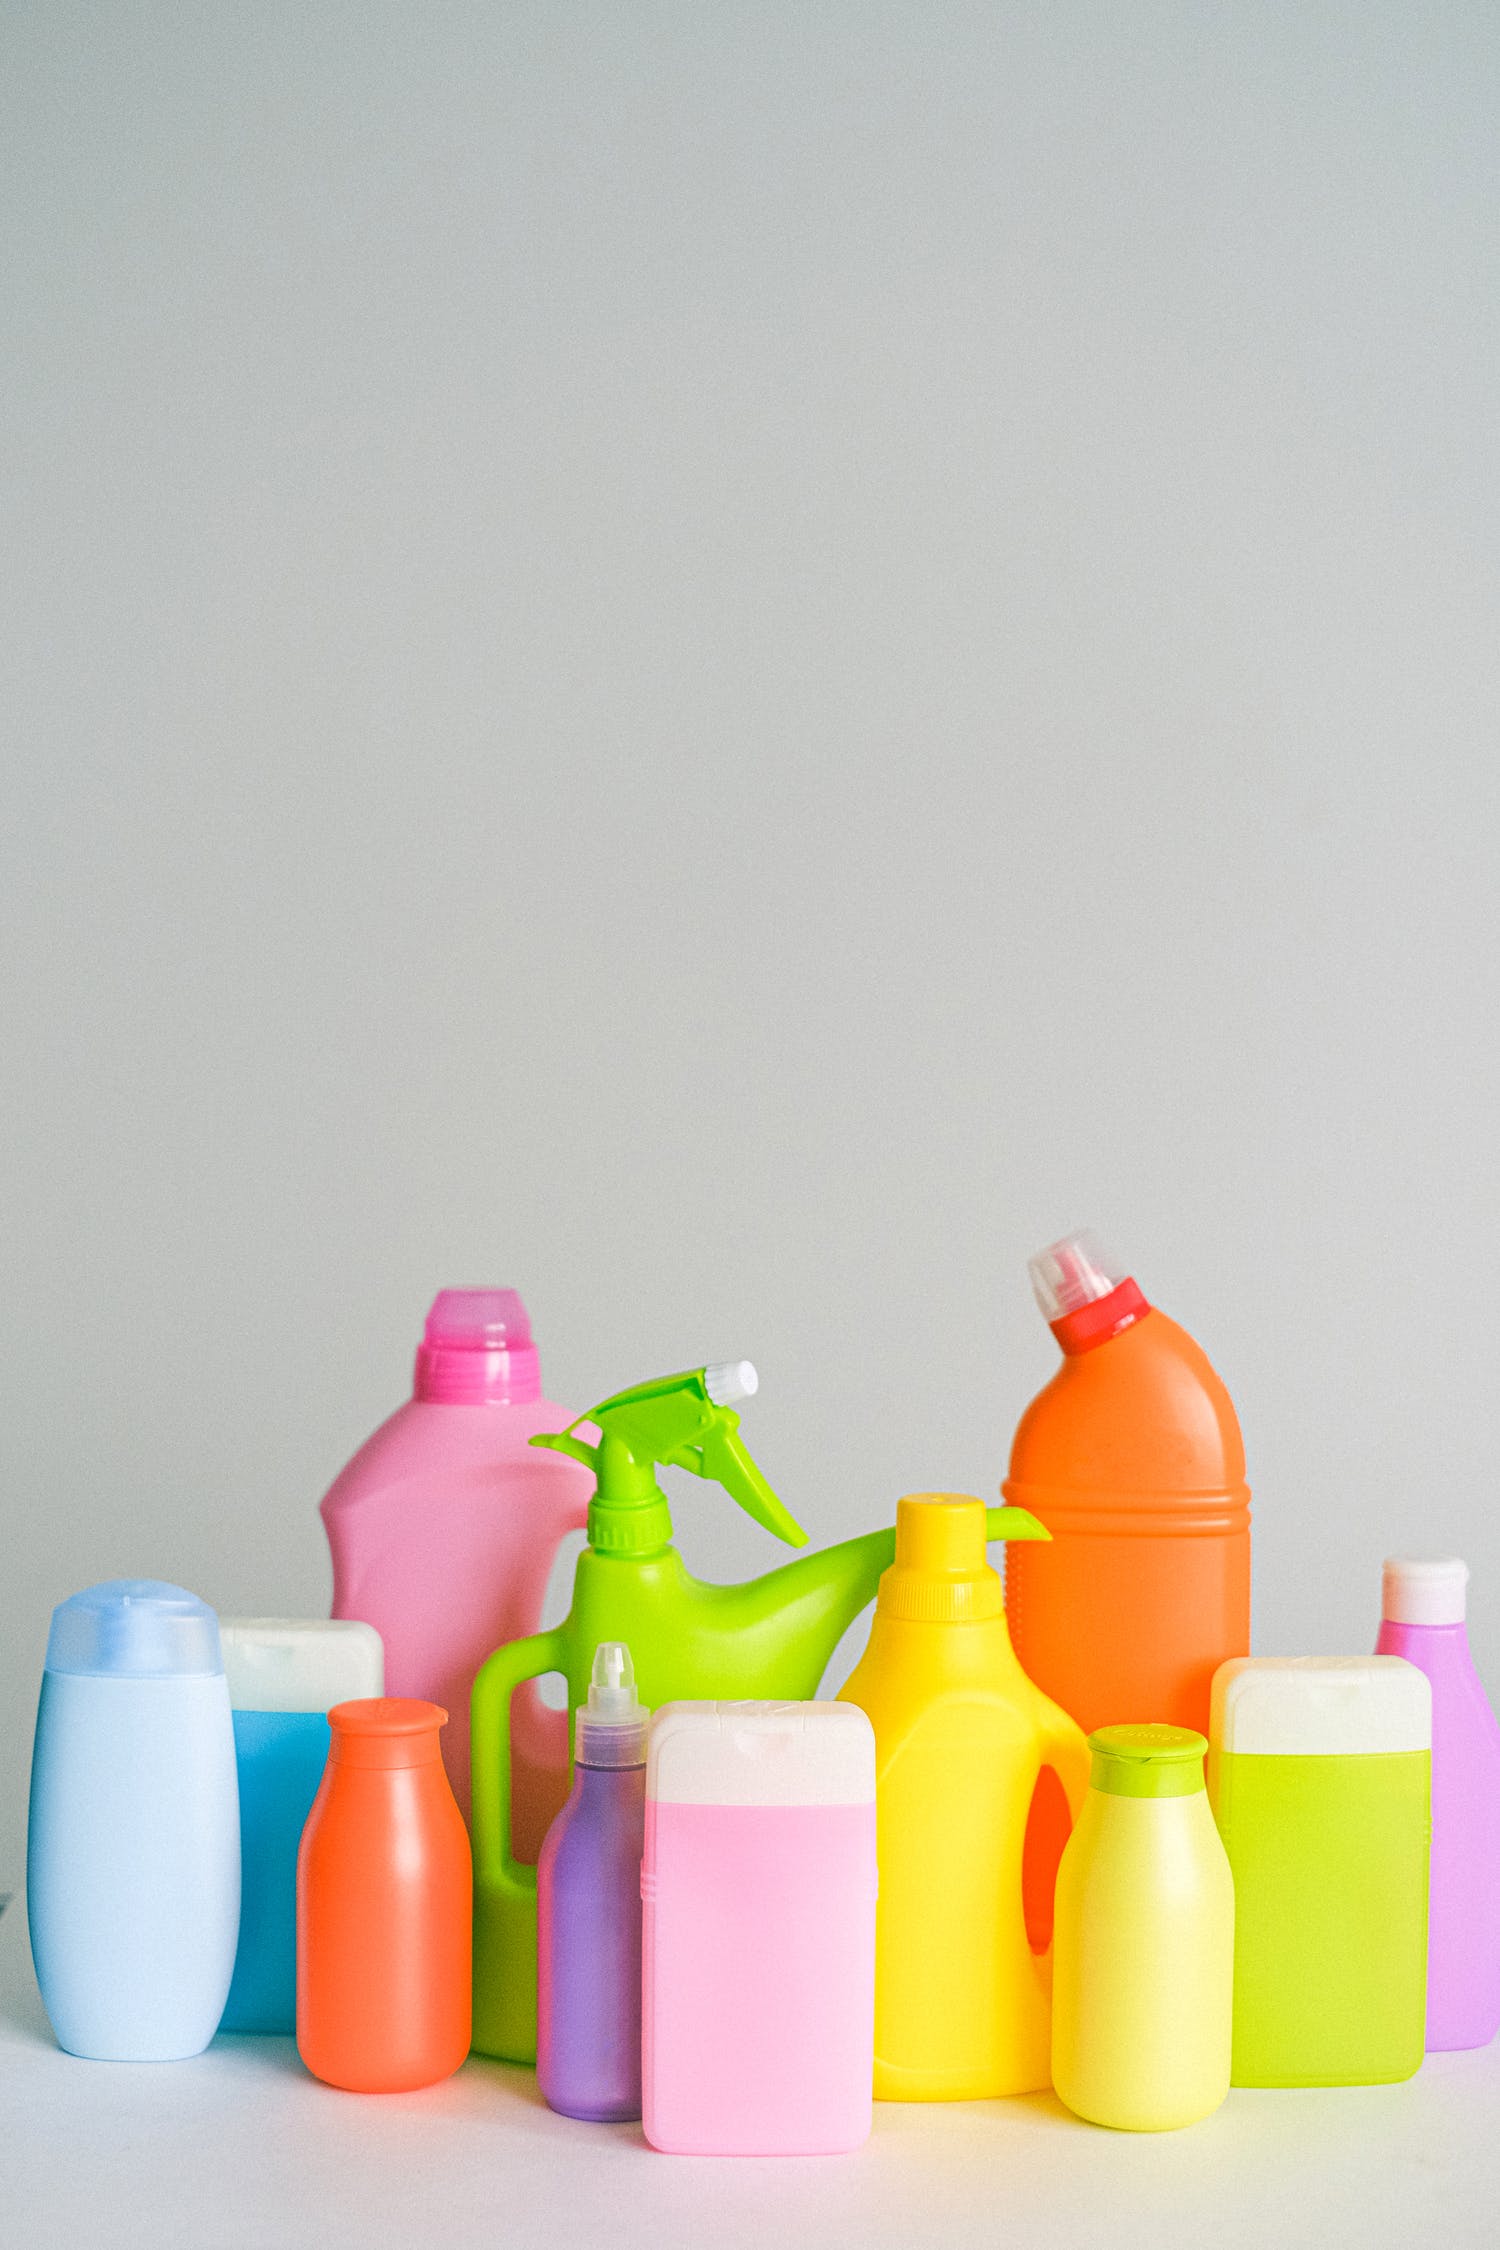 5 Must-Have Cleaning Supplies in 2022